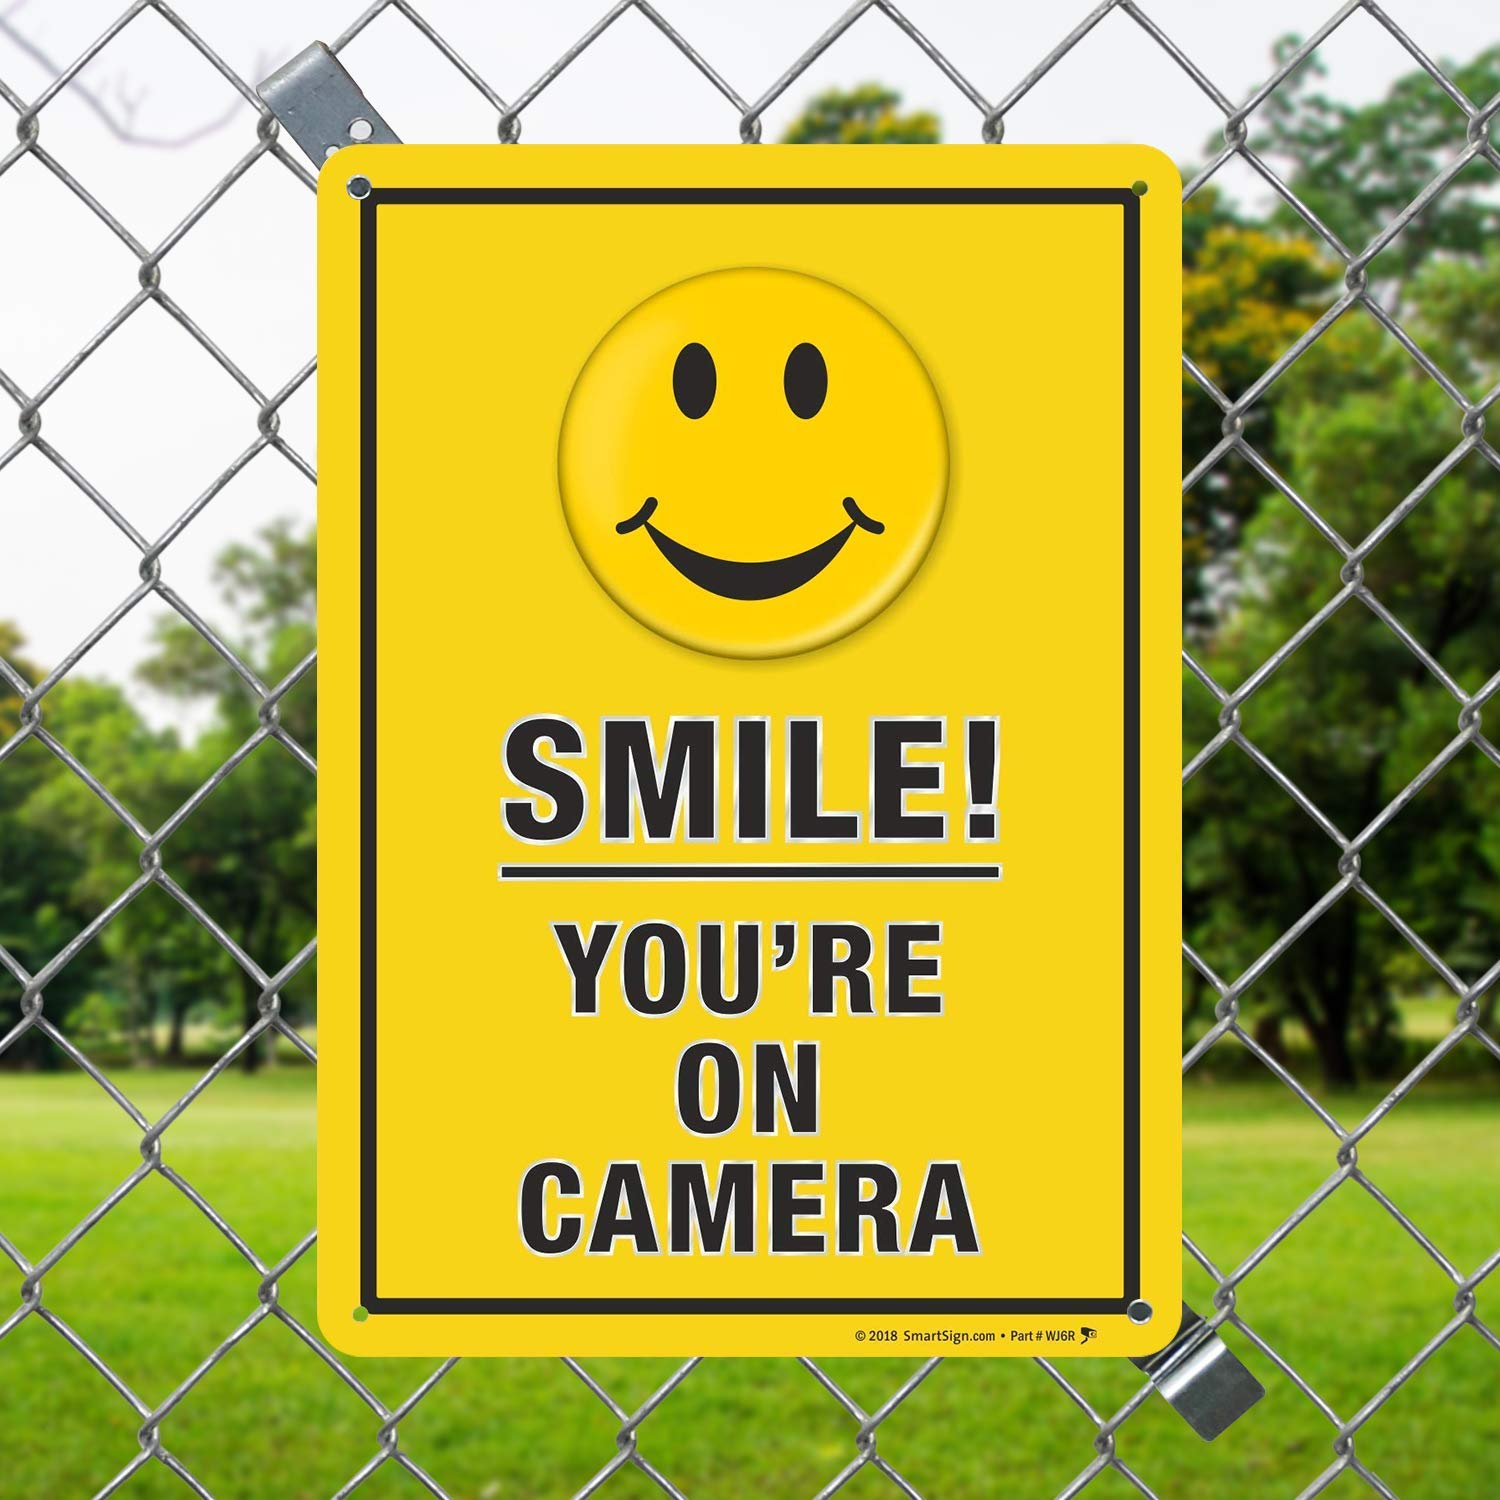 Smile! You're On Camera Yellow Color with Black Border Signs, SKU S2